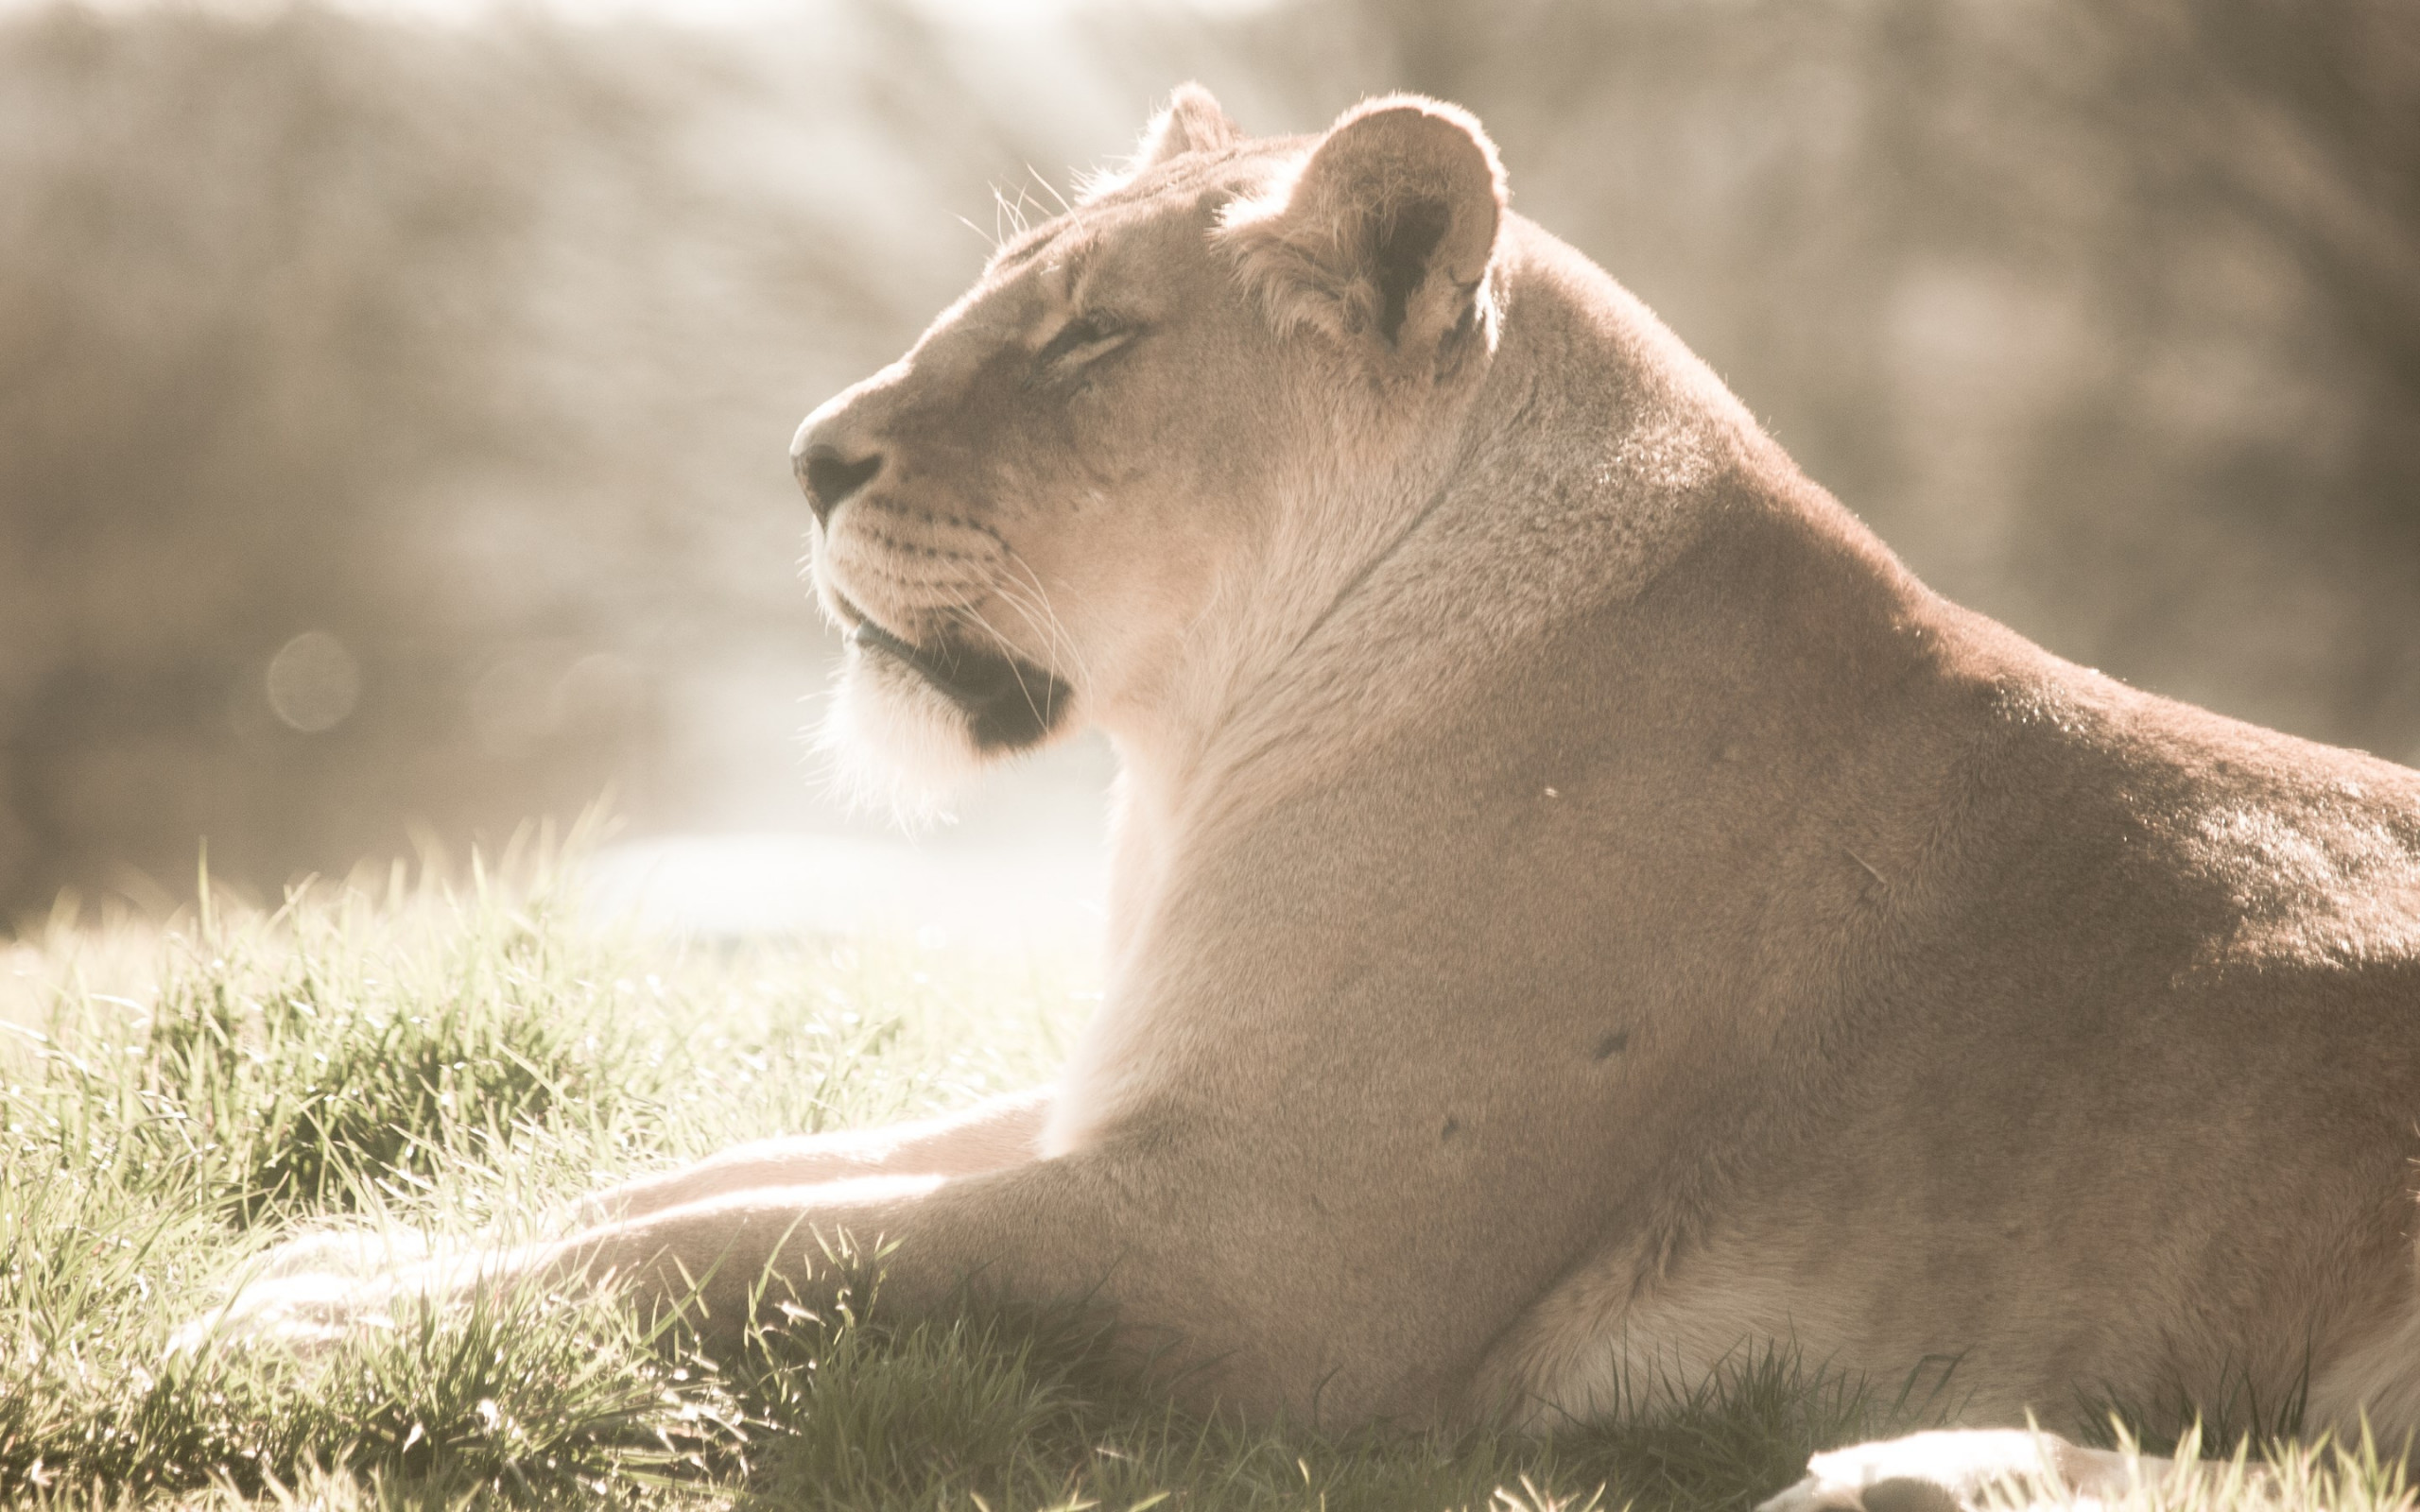 Lioness at Whipsnade Zoo wallpaper 2560x1600